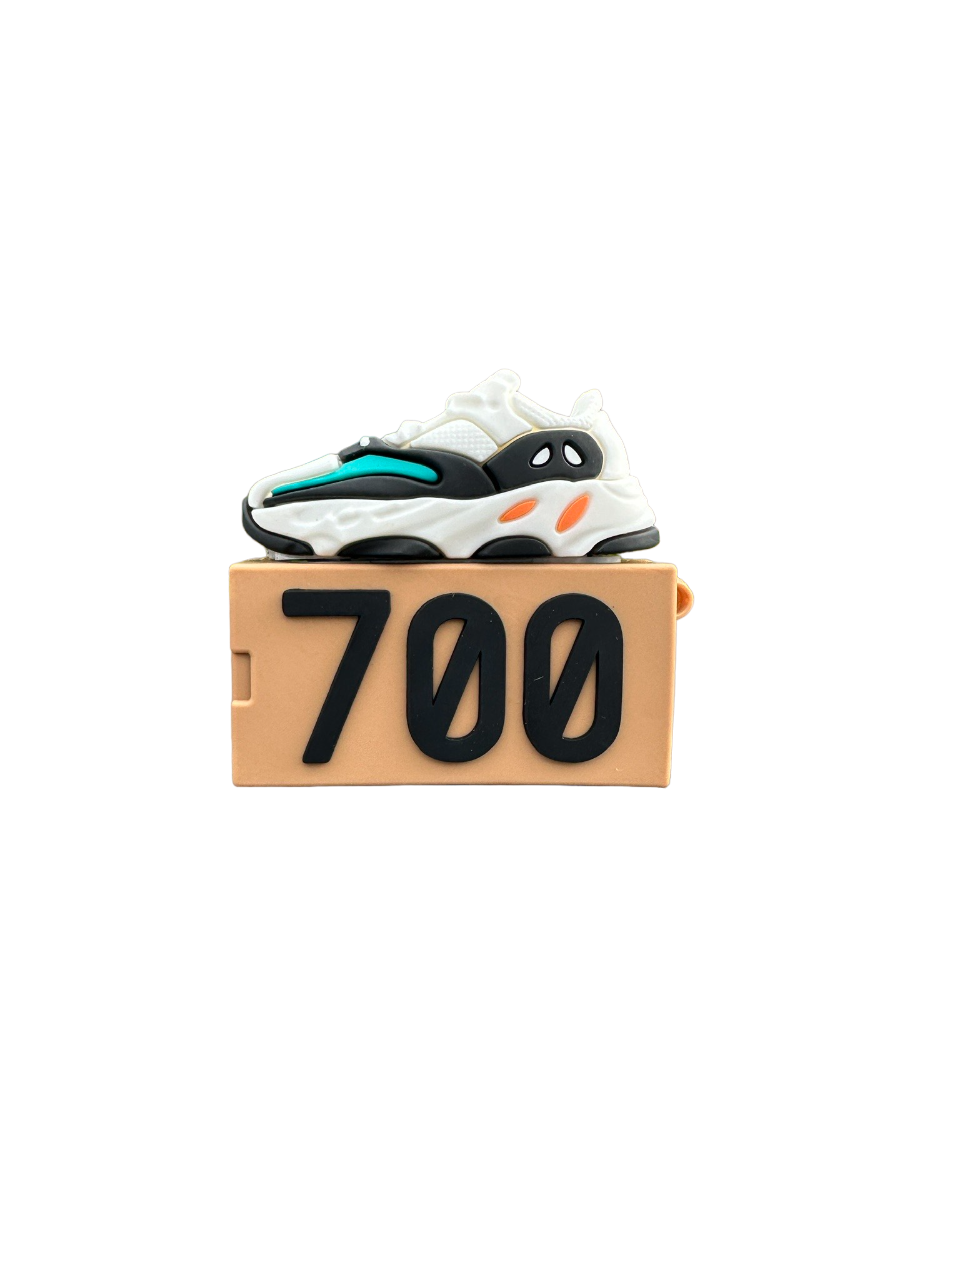 White Yeezy 700 Airpods Case